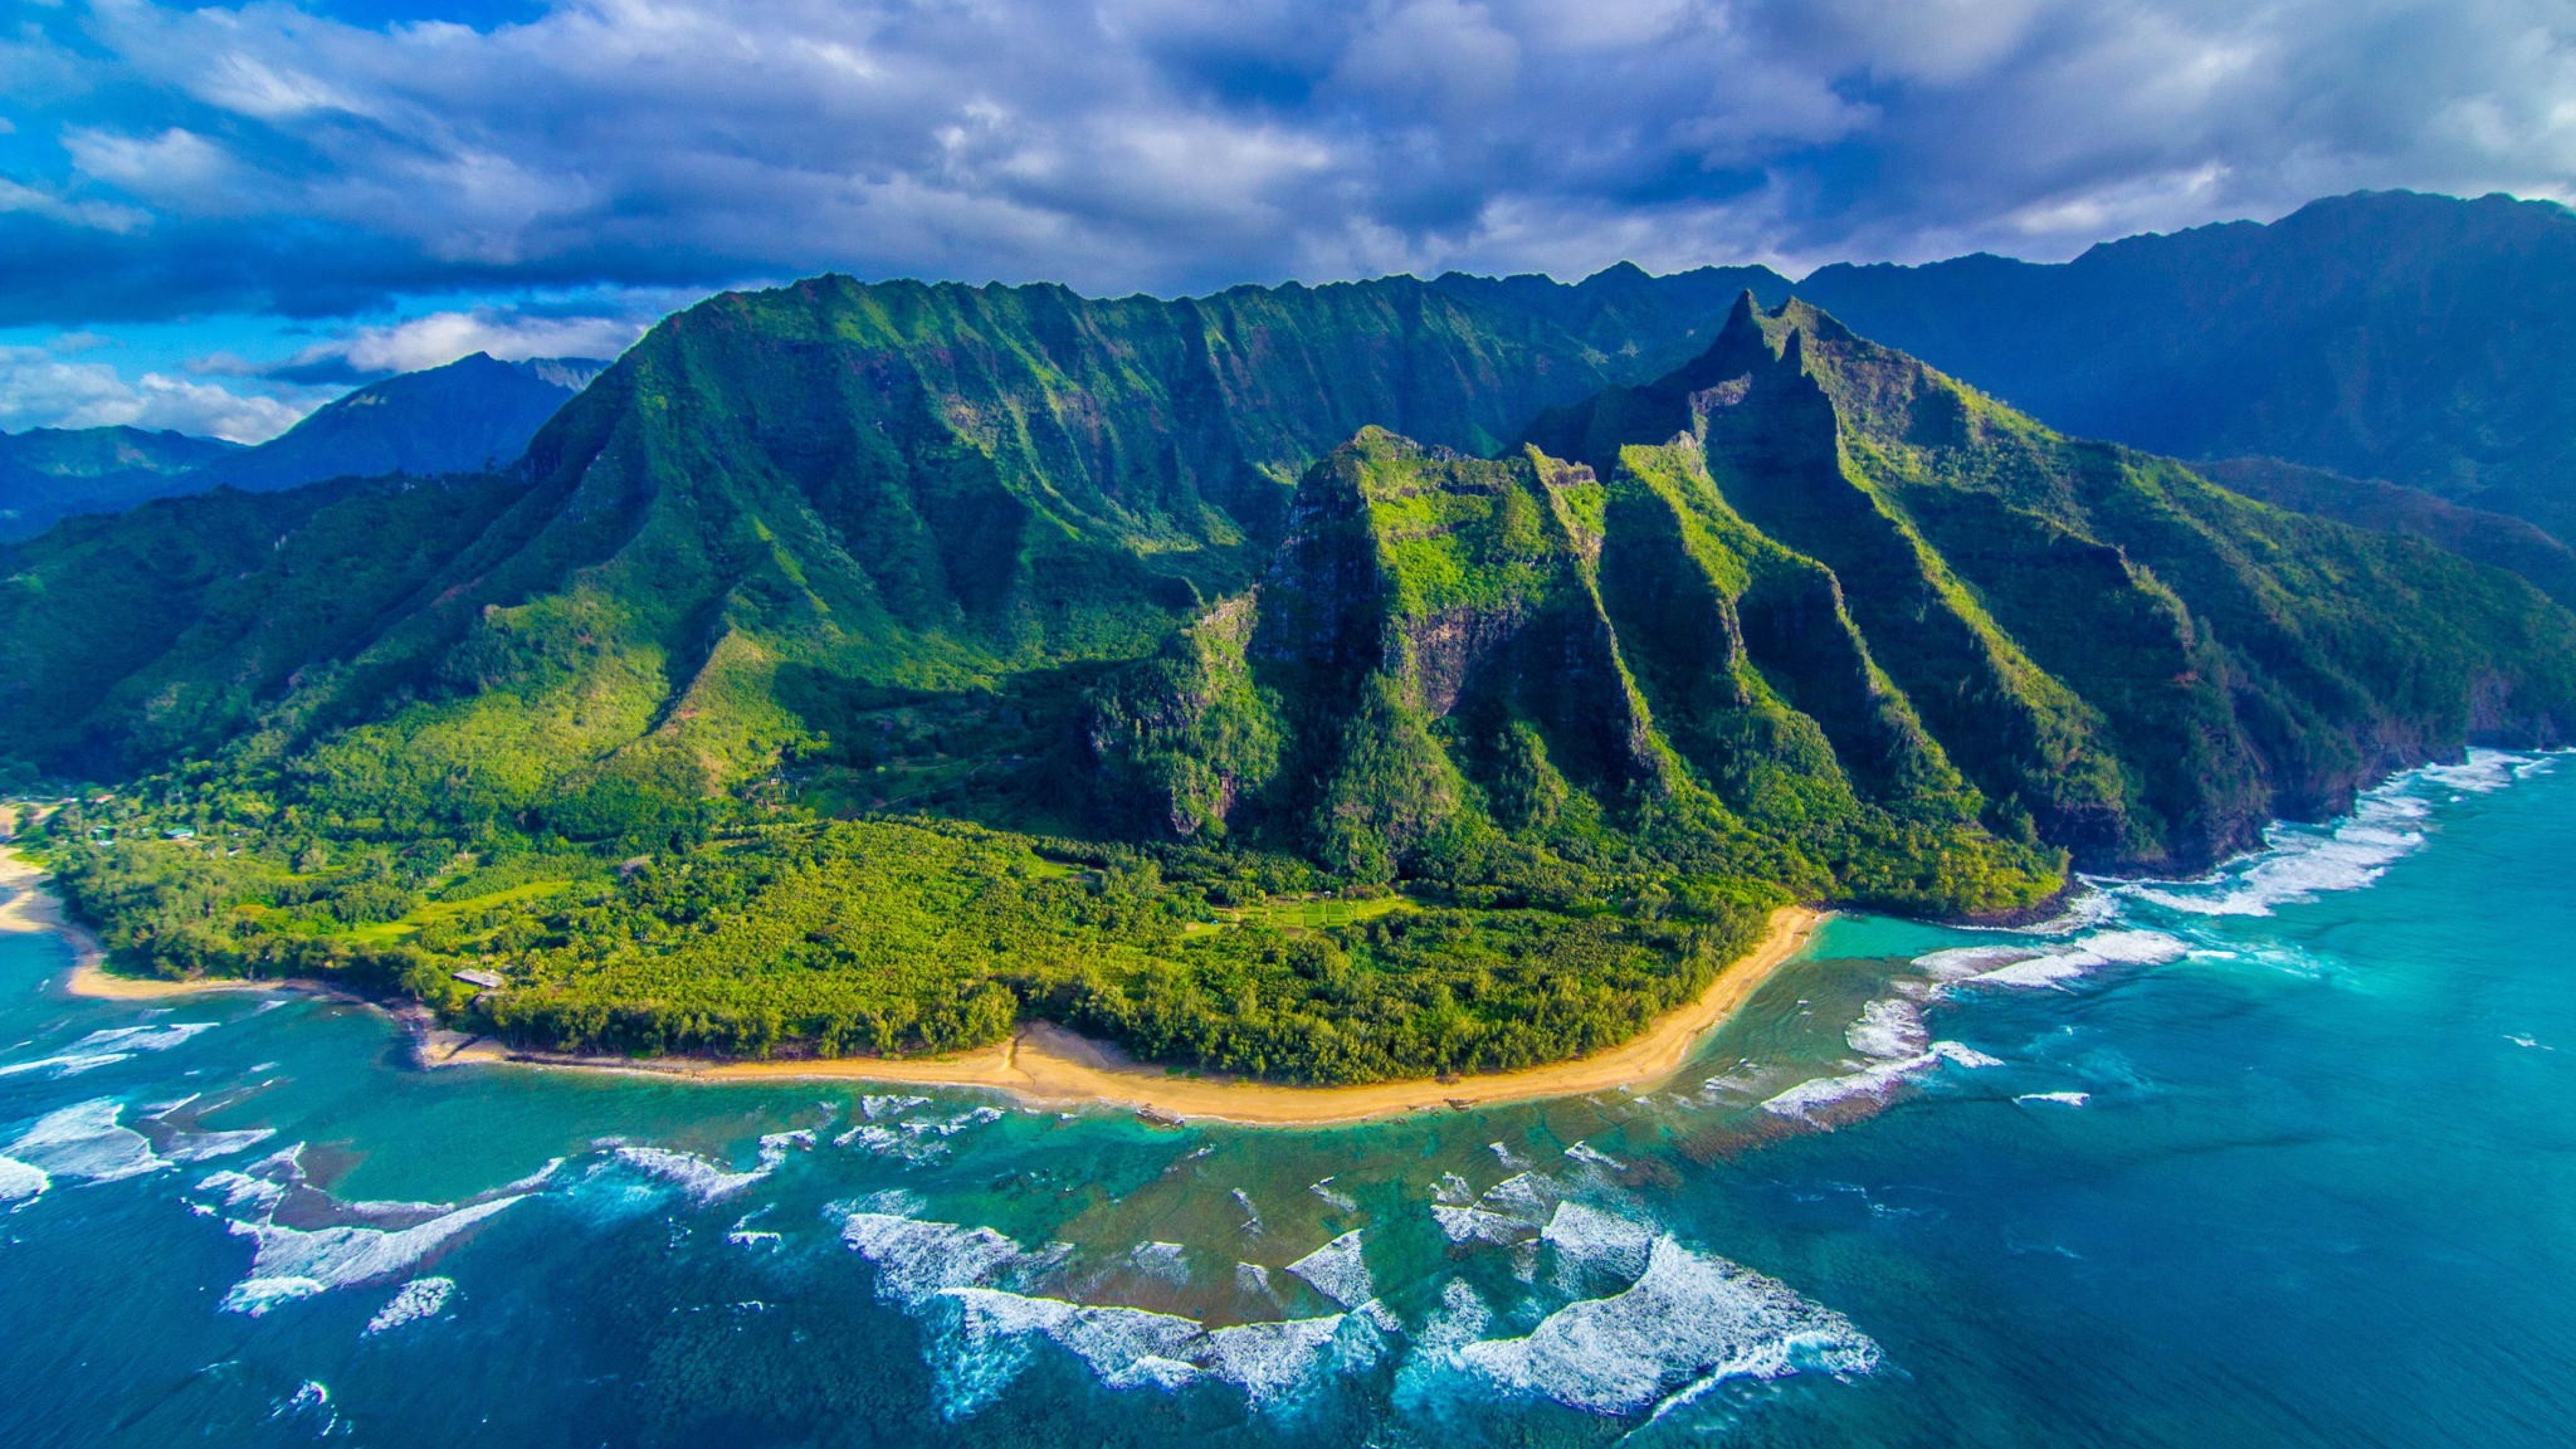 Hawaii Wallpaper, HD Hawaii Wallpaper. Hawaii Best Pics Collection